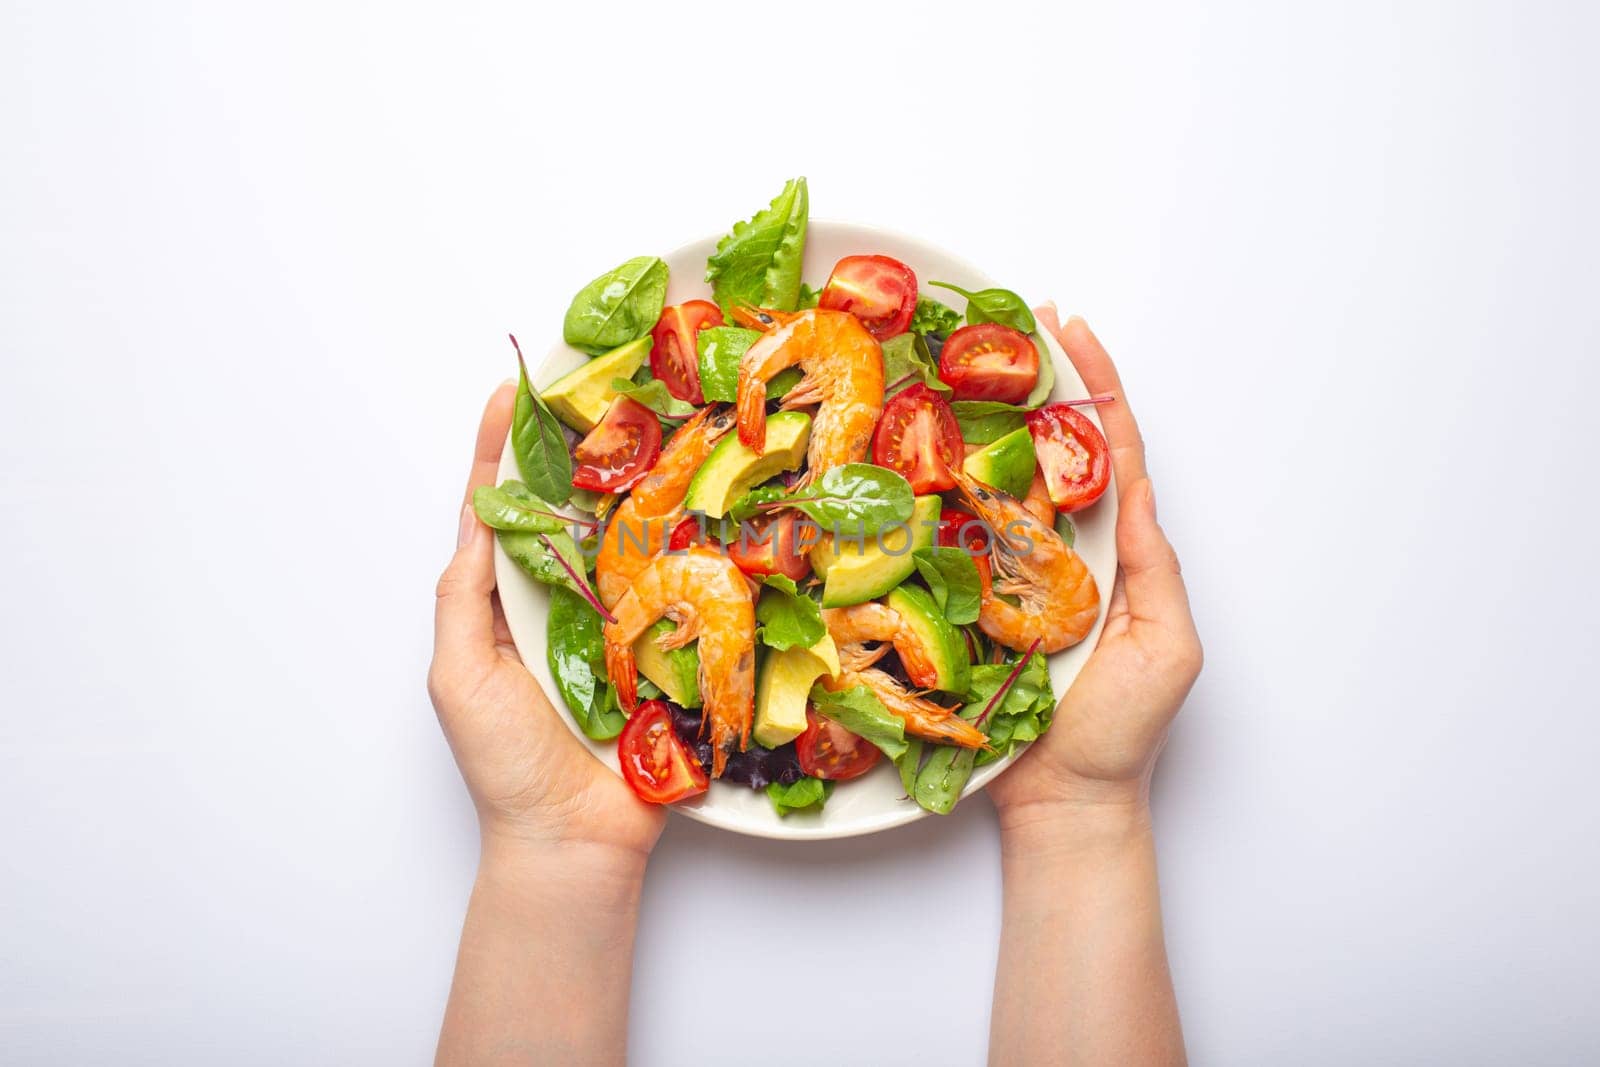 Female hands holding healthy salad with grilled shrimps, avocado, cherry tomatoes and green leaves on white plate isolated on white background top view. Clean eating, nutrition and dieting concept..